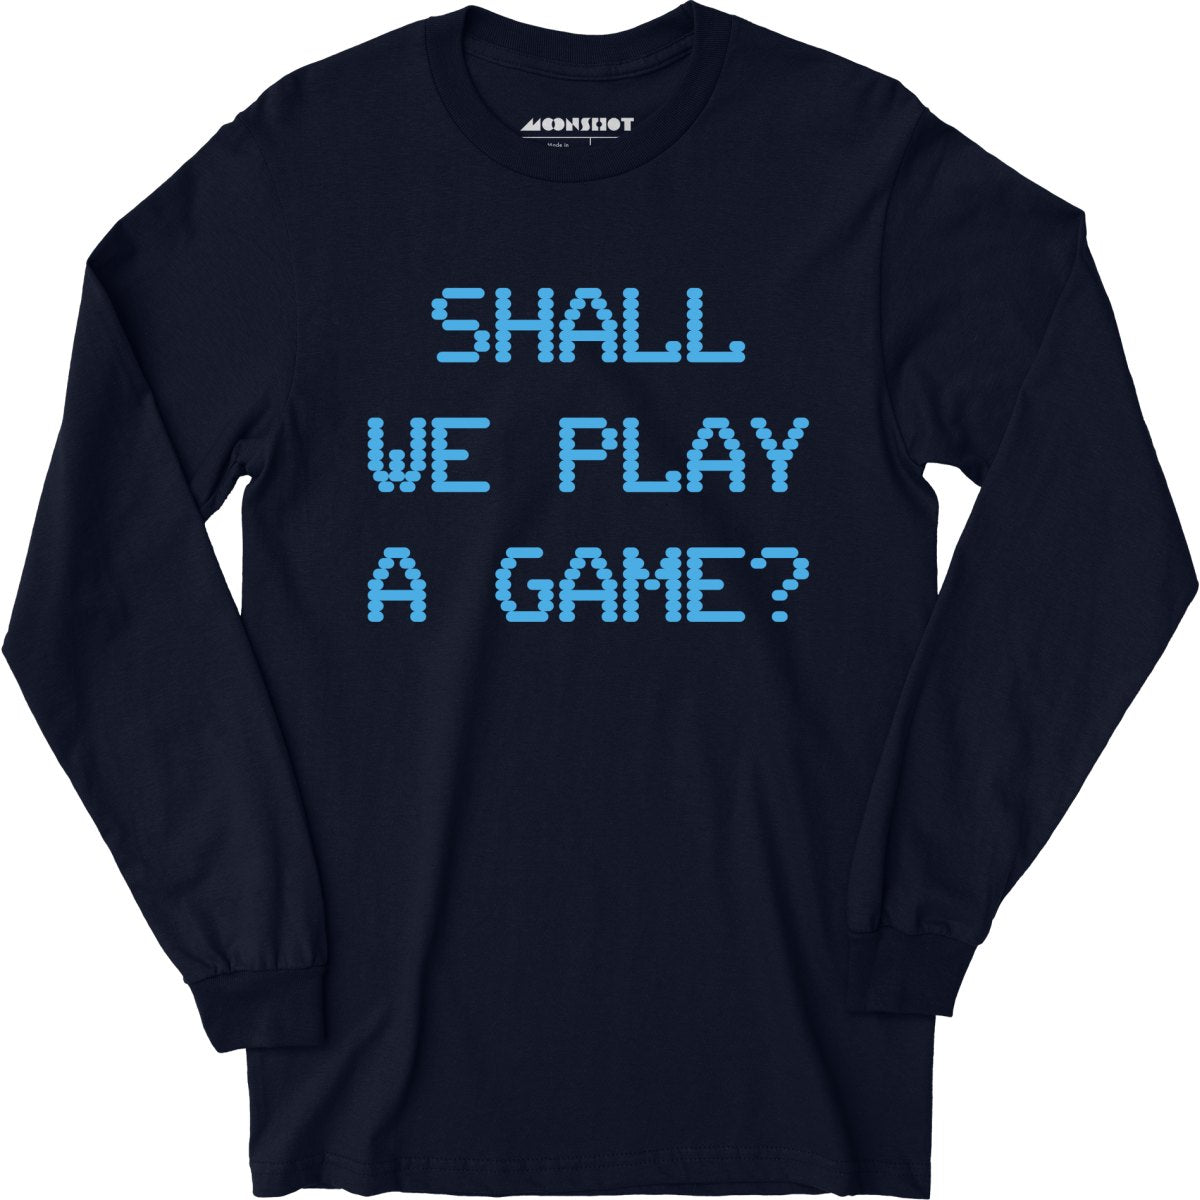 Shall We Play a Game? - Long Sleeve T-Shirt